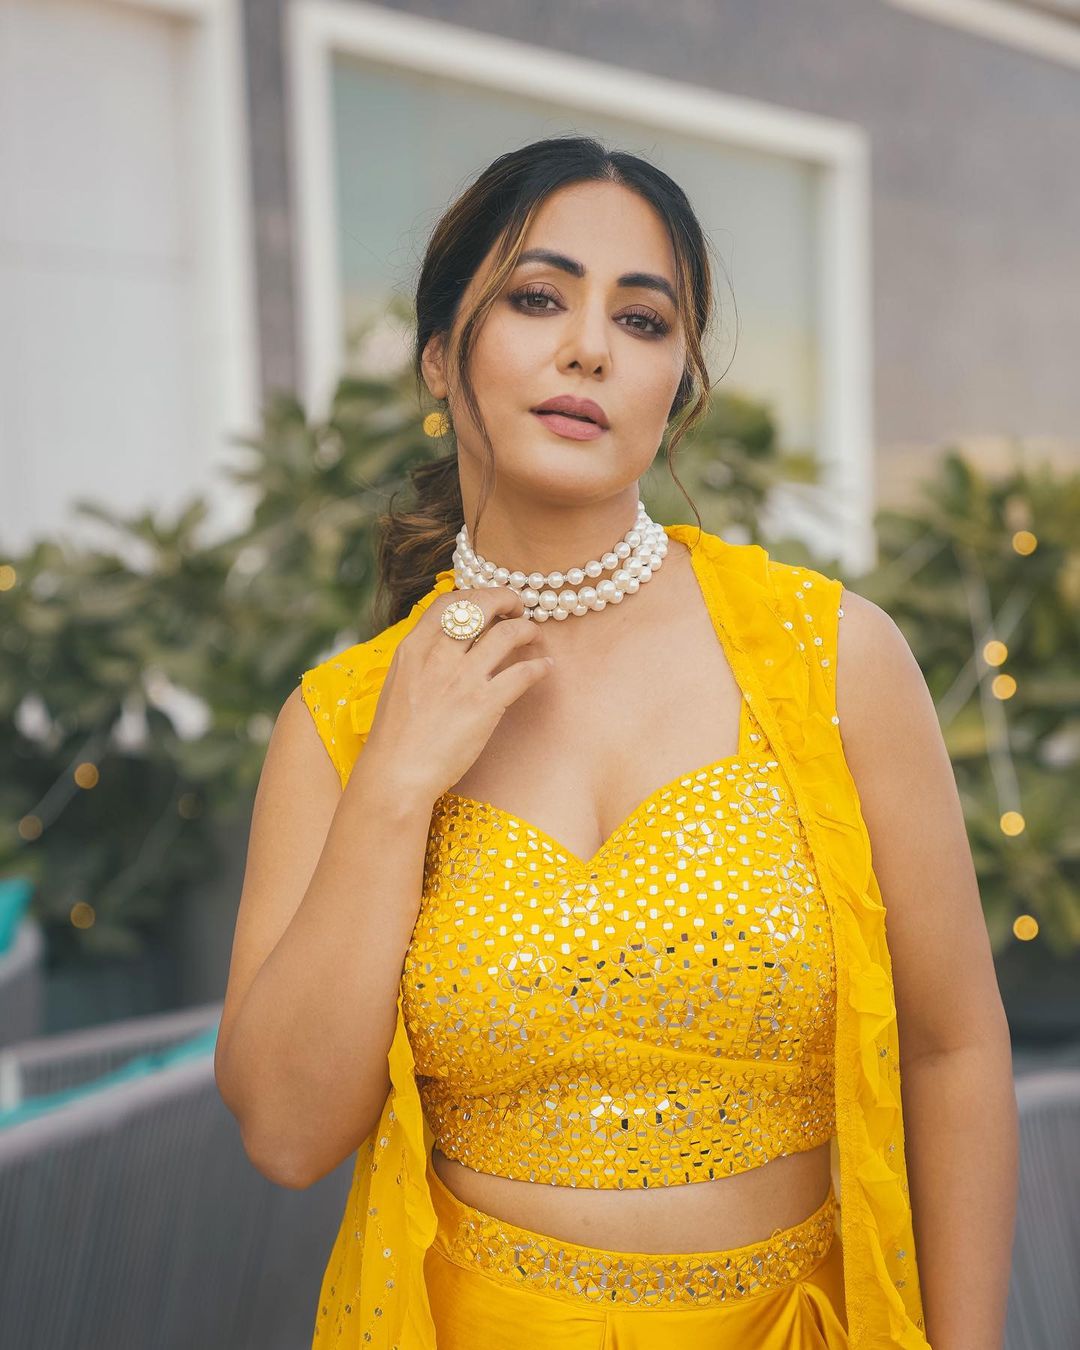 Hina Khan wears a three-tiered pearl choker to complete the look